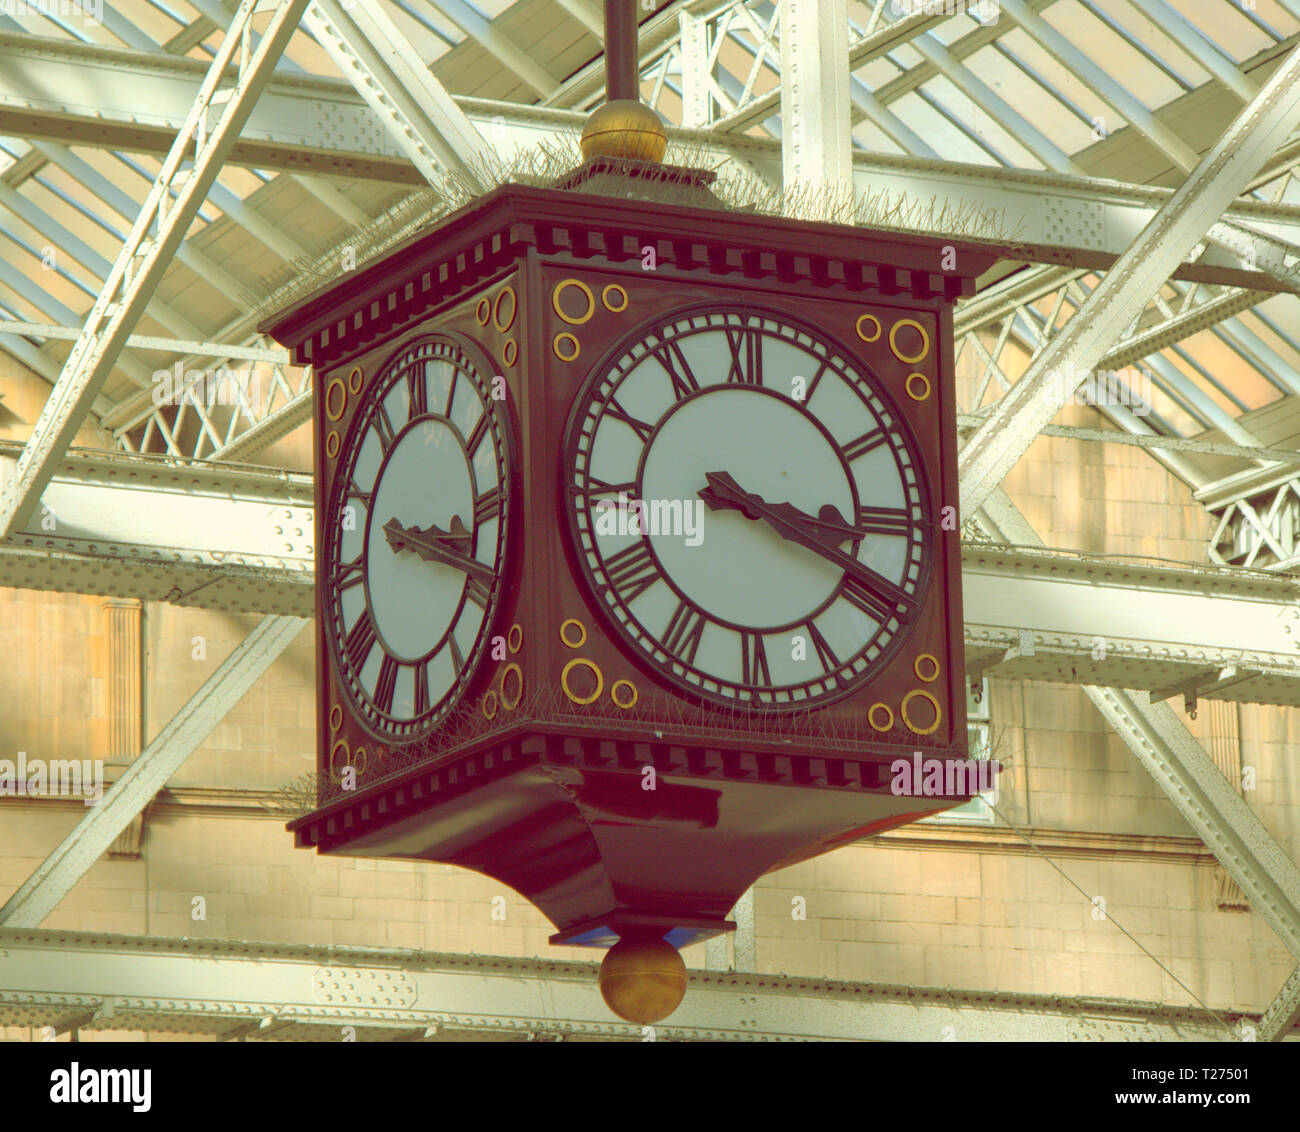 Glasgow, Scotland, UK 30th March, 2019. Clocks go forward and the iconic clocks in the city are set for the change tomorrow, the Victorian clock in central station is often a meeting point that sees mistakes at this rime of year. Gerard Ferry/Alamy Live News Stock Photo